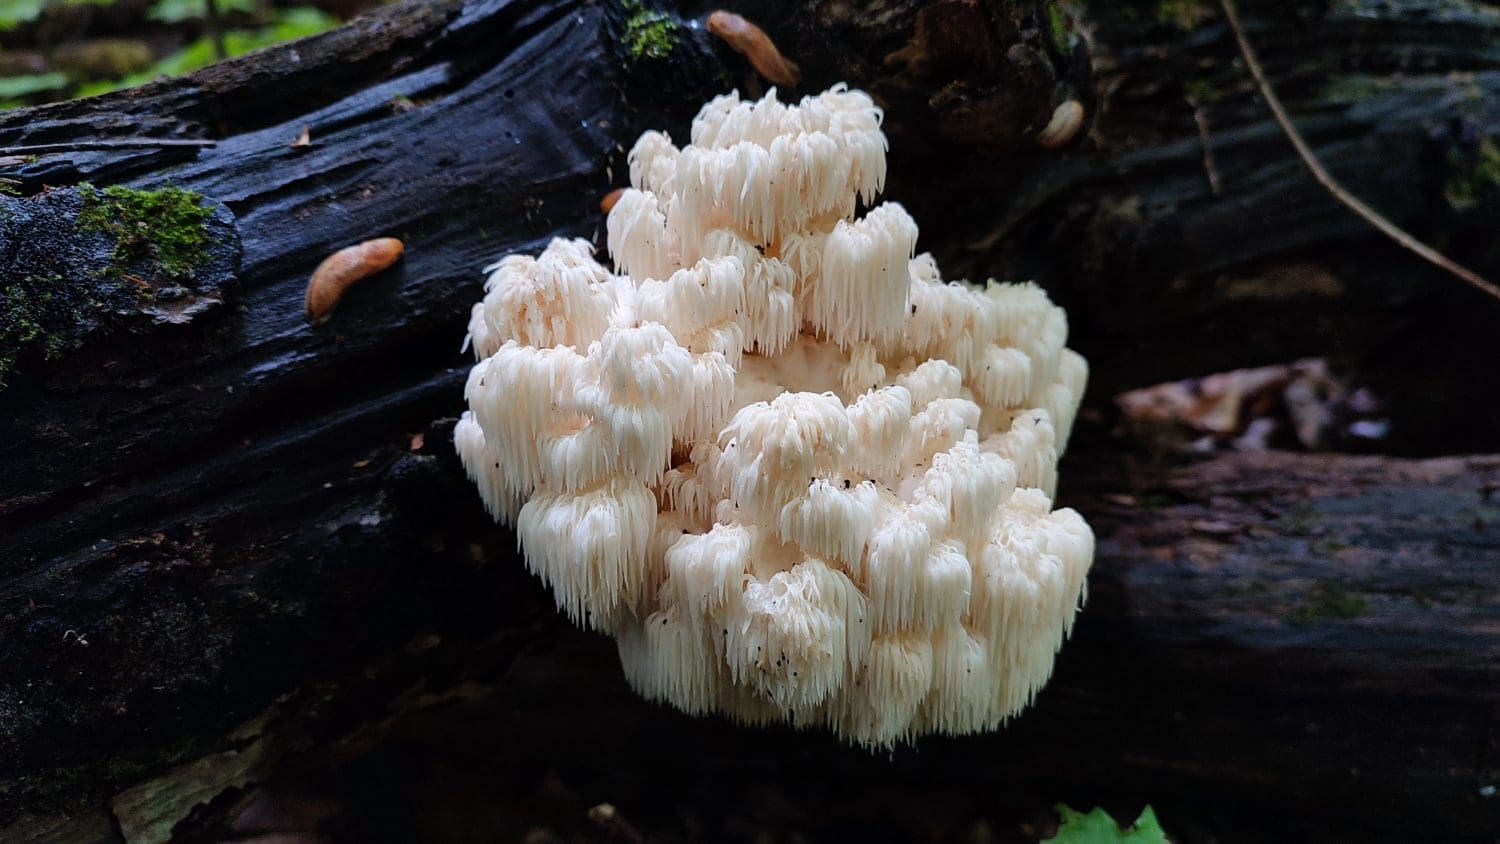 Hericium americanum, commonly known as the bear's head tooth fungus, is an edible mushroom in the tooth fungus group.